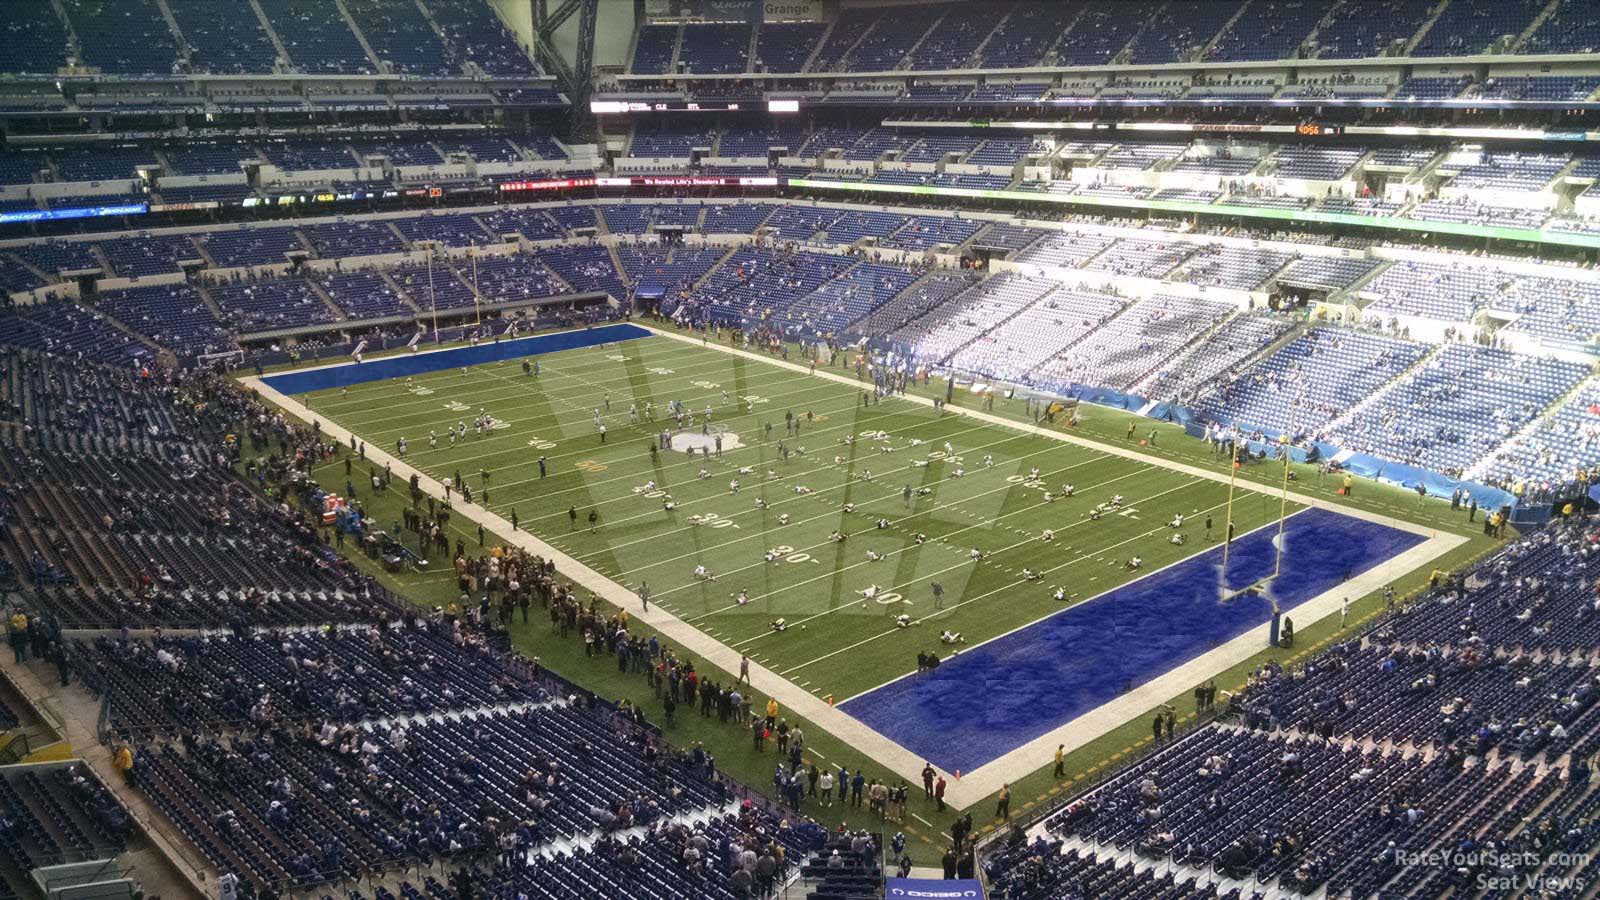 section 506, row 2 seat view  for football - lucas oil stadium